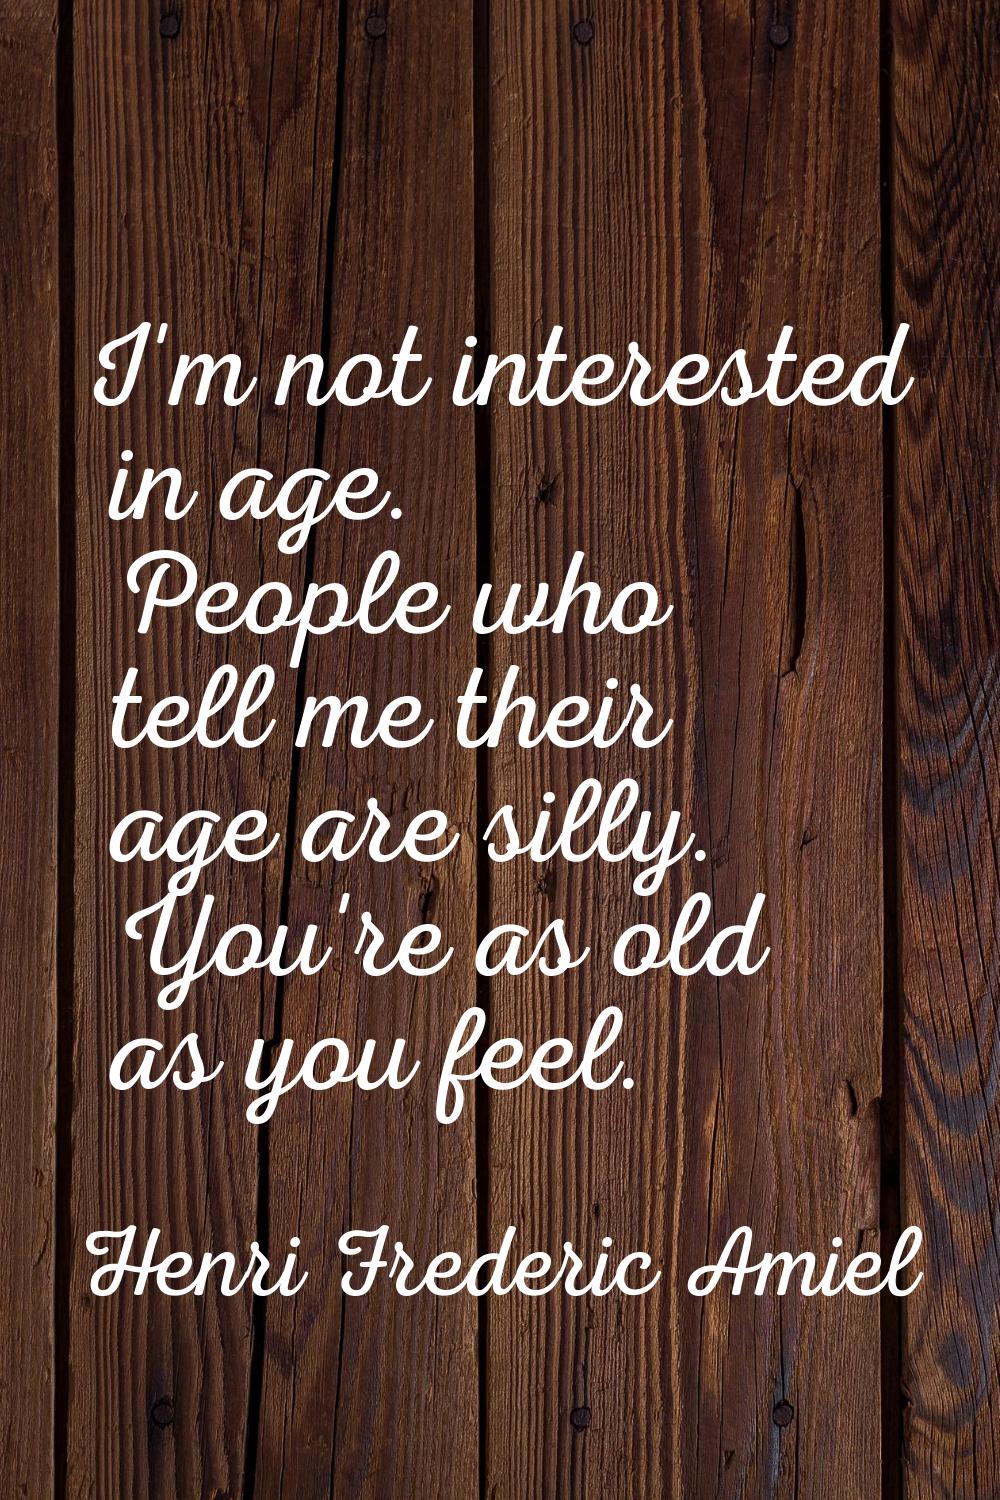 I'm not interested in age. People who tell me their age are silly. You're as old as you feel.